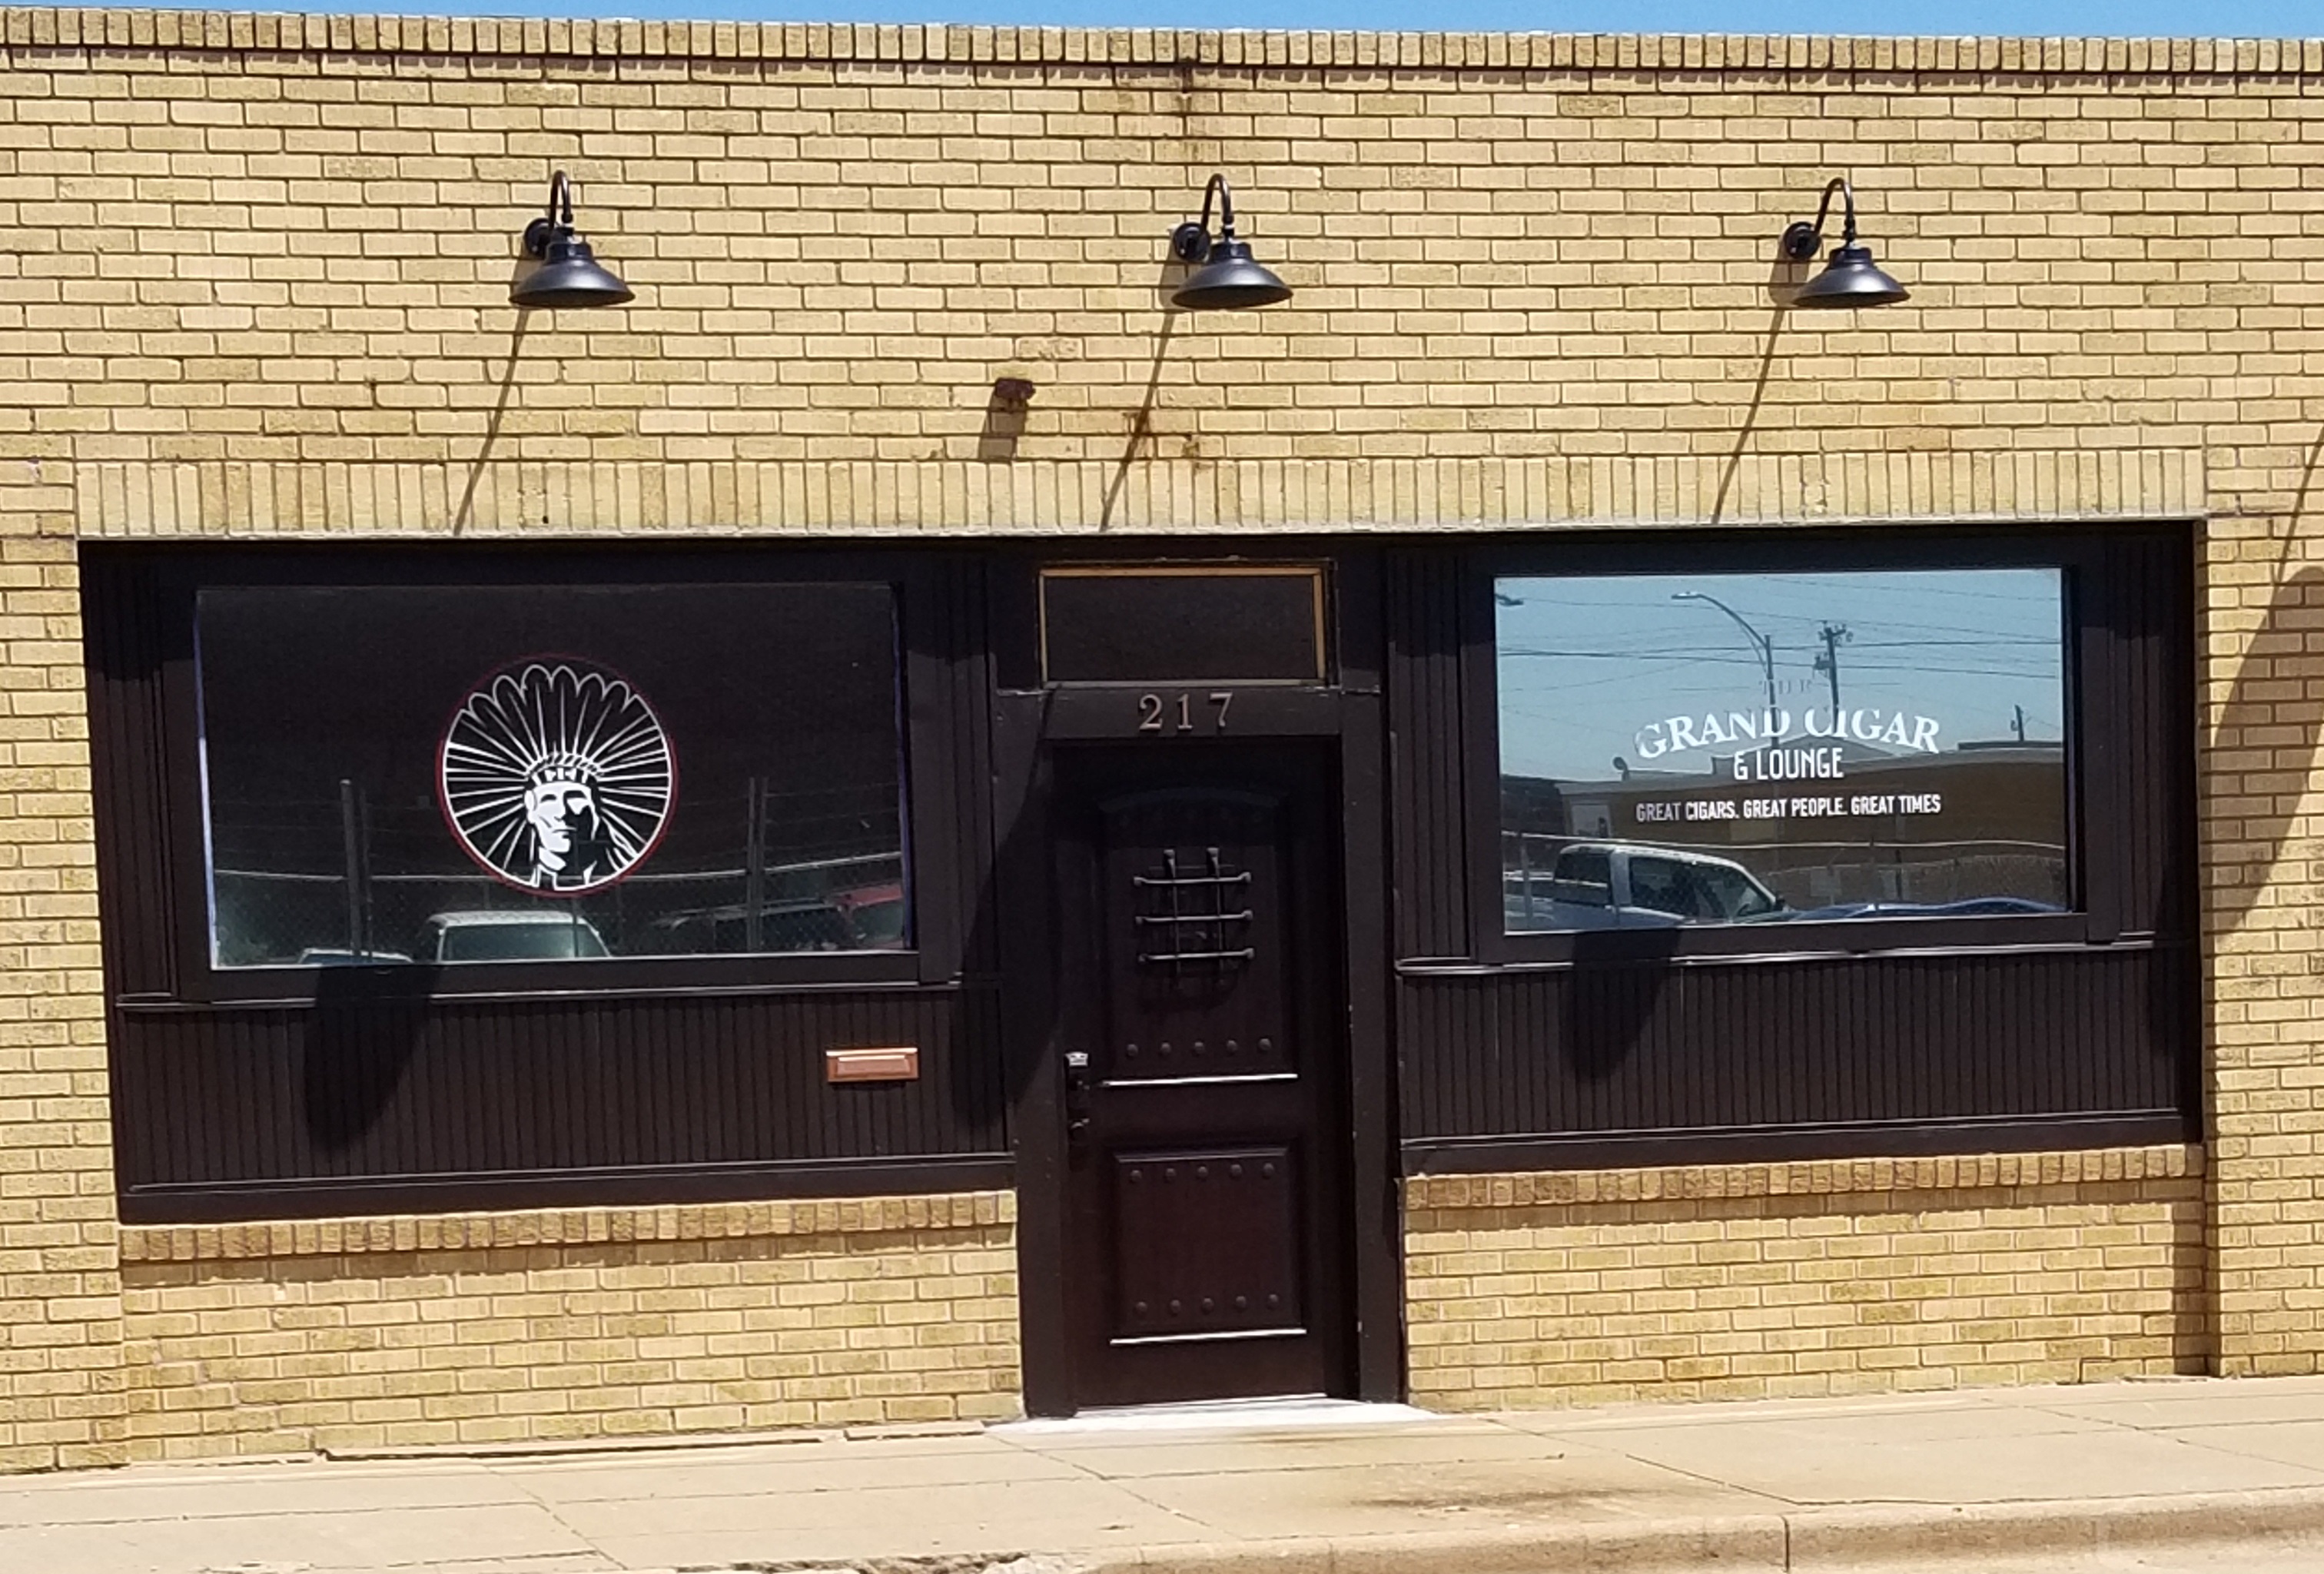 The Grand Cigar and Lounge opens this afternoon